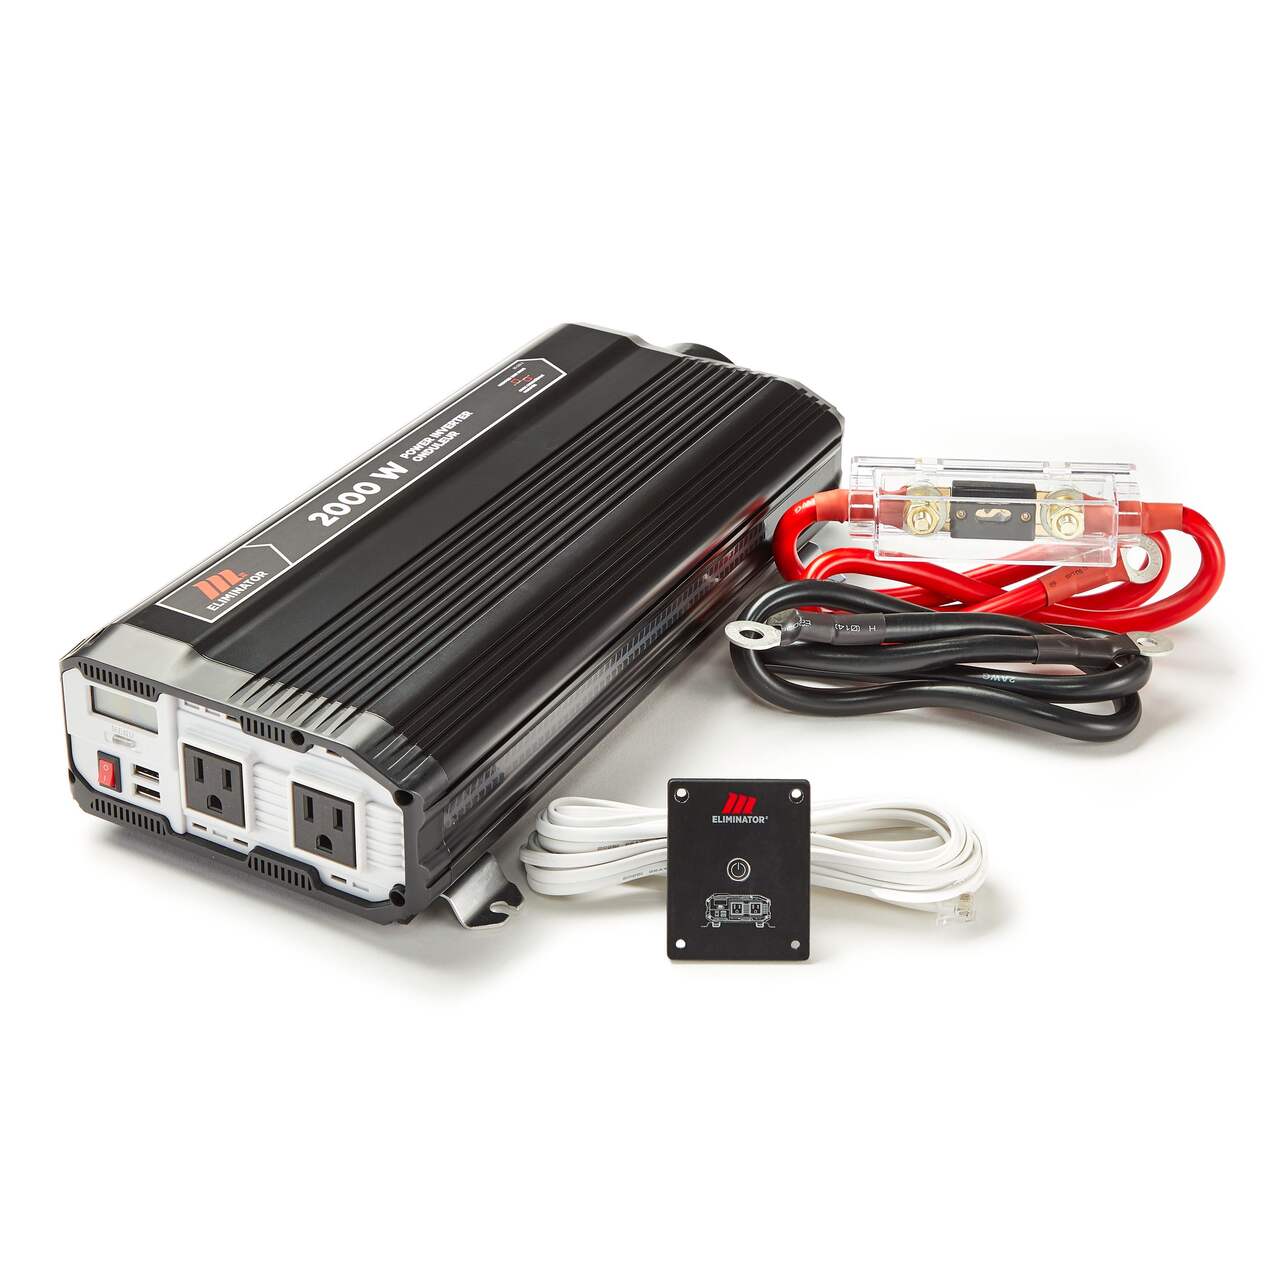 https://media-www.canadiantire.ca/product/automotive/light-auto-parts/auto-battery-accessories/0112101/motomaster-eliminator-2000w-modified-sine-power-inverter-6cca552f-3992-4b4c-b9e9-3351d539a069-jpgrendition.jpg?imdensity=1&imwidth=1244&impolicy=mZoom